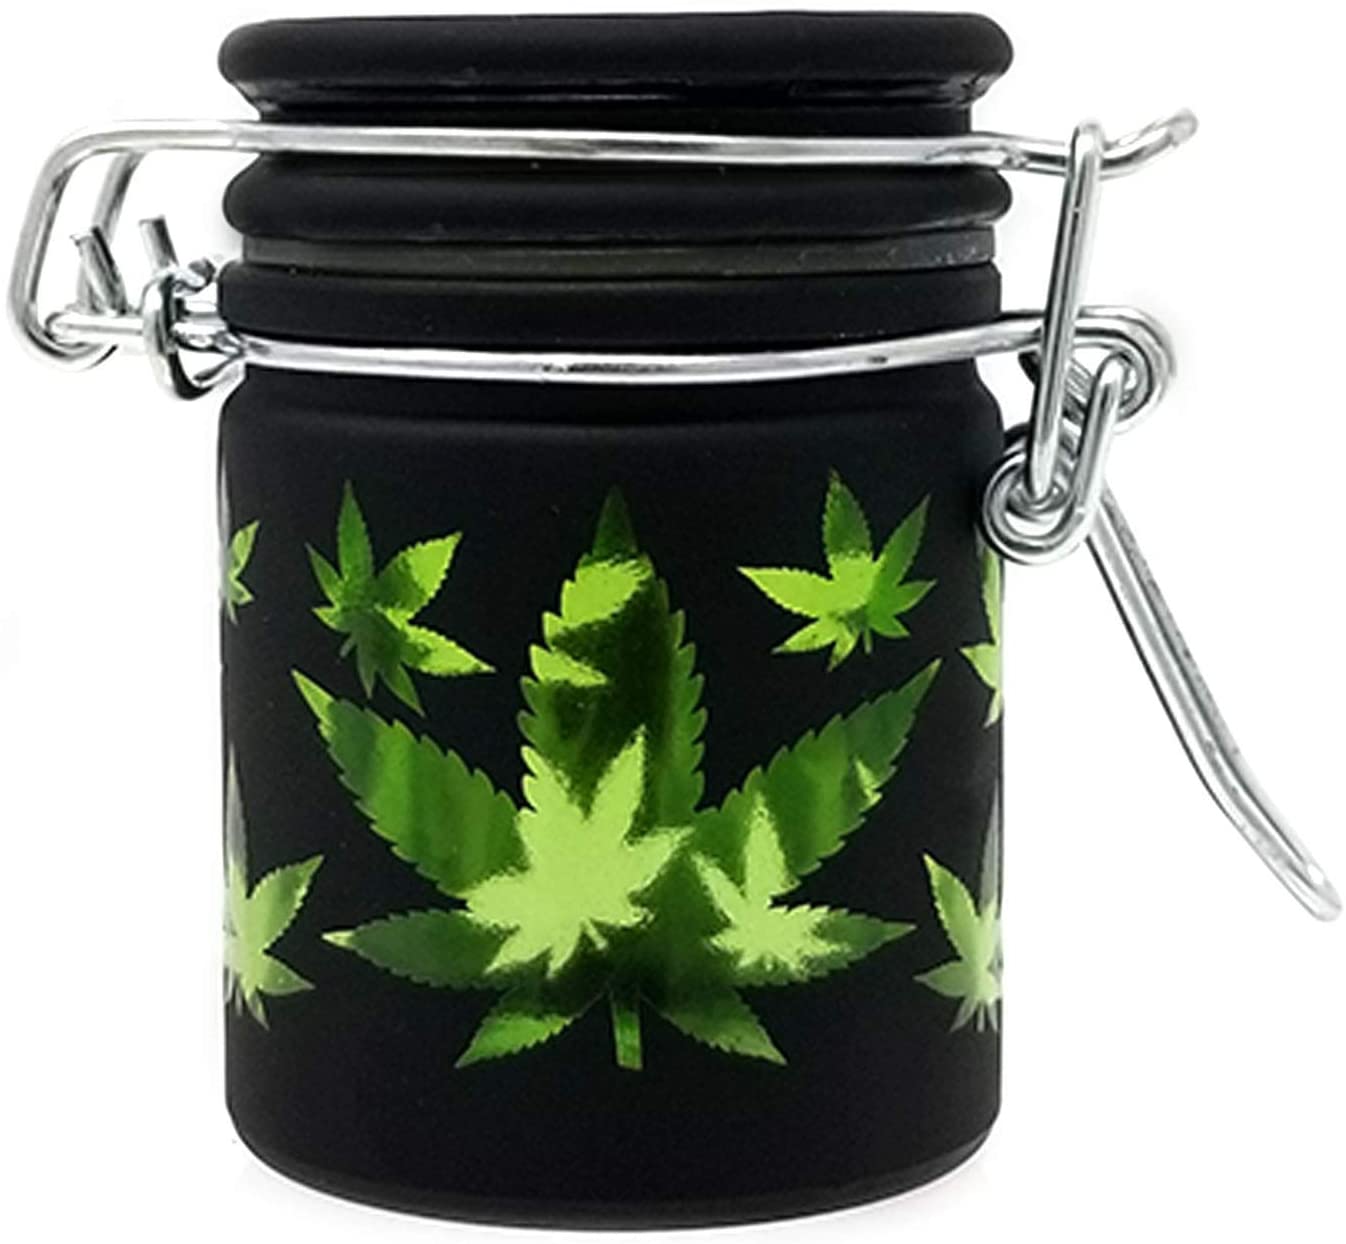 Glass Herb Stash Jar Black Frosted with Green Leaf-Small